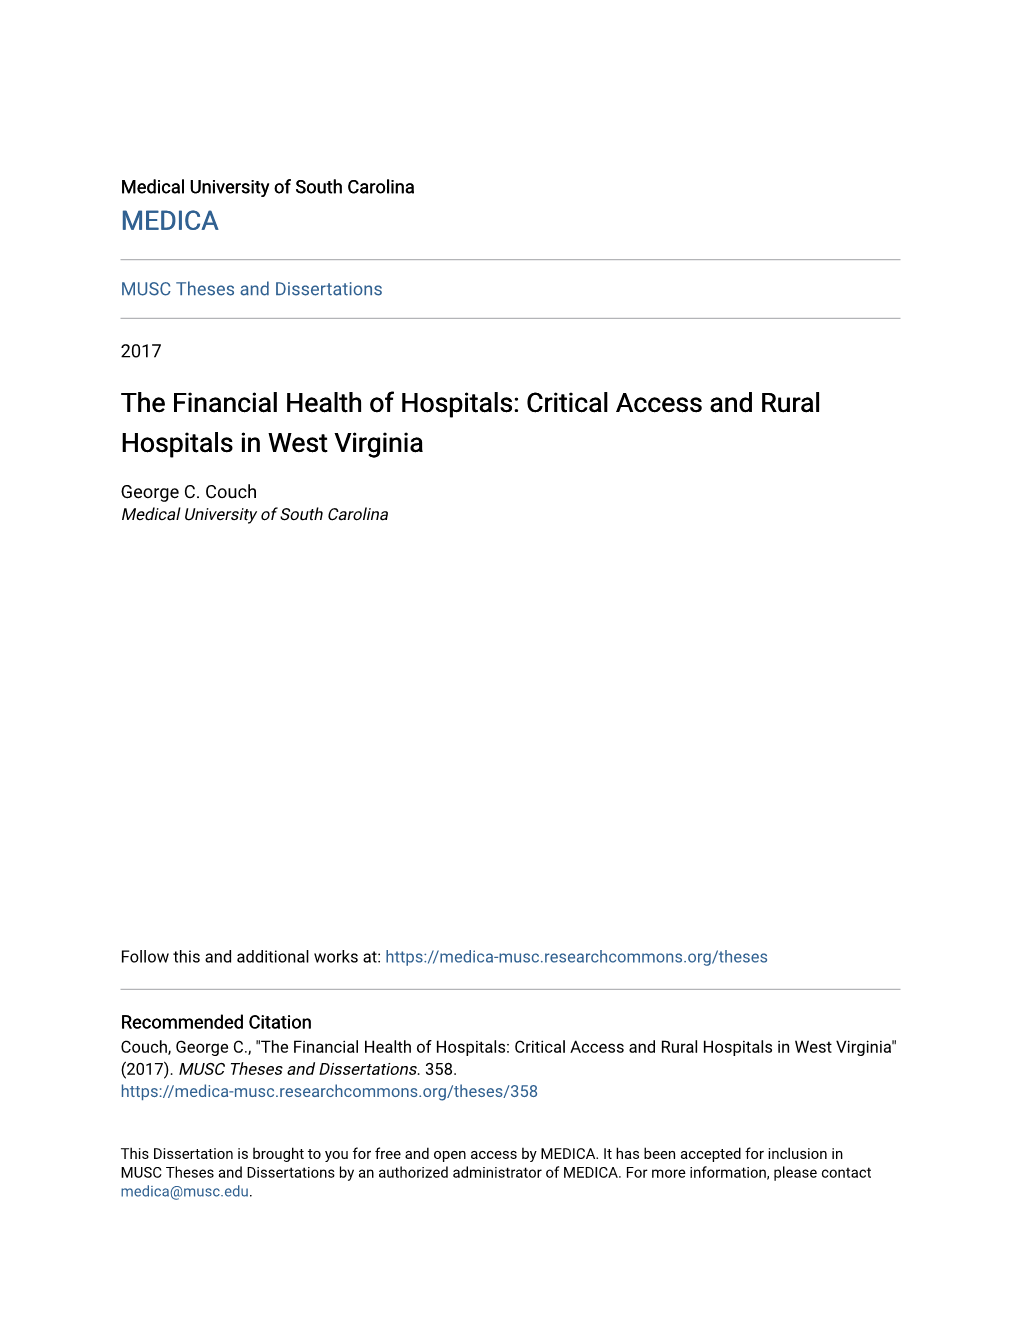 Critical Access and Rural Hospitals in West Virginia